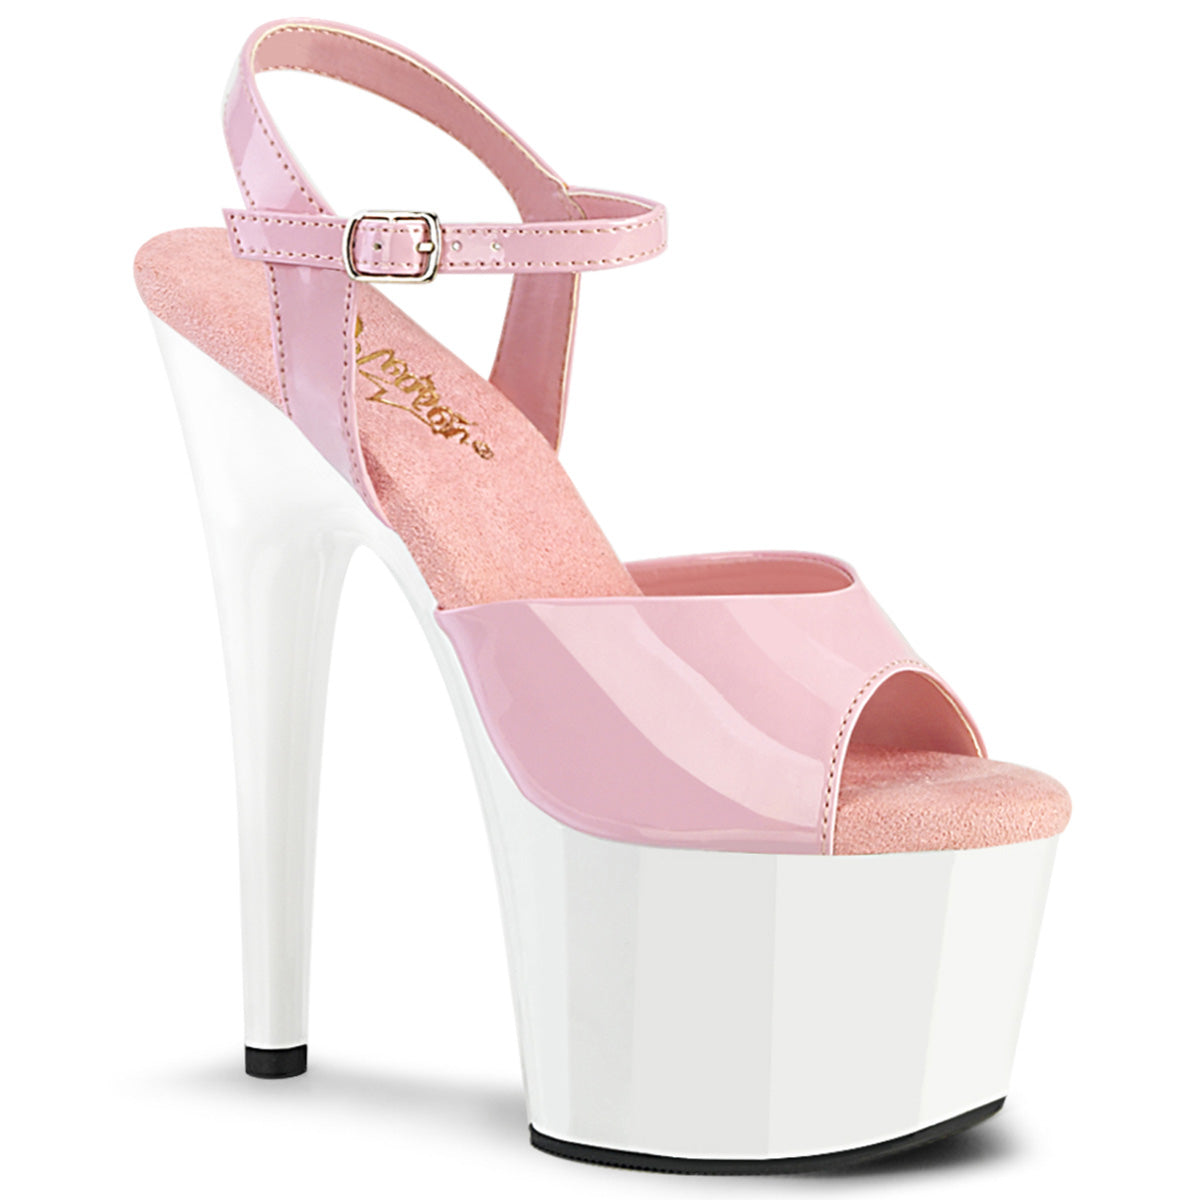 ADORE-709 - Baby Pink Patent/White